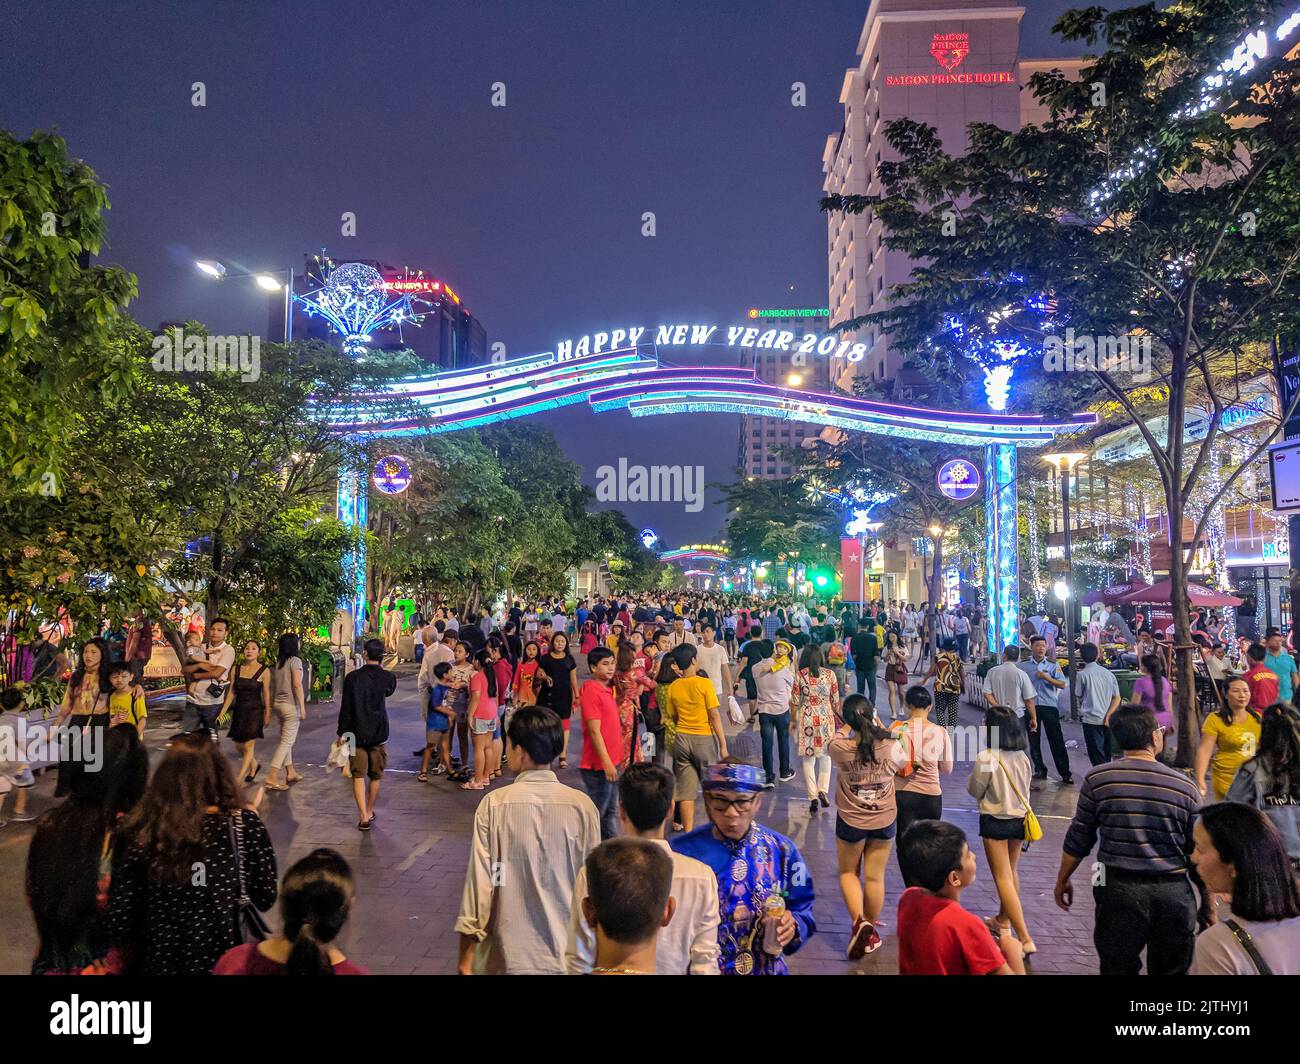 Crowds gather in Ho Chi Minh City for the 2018 Chinese New Year celebrations (Tet) Stock Photo